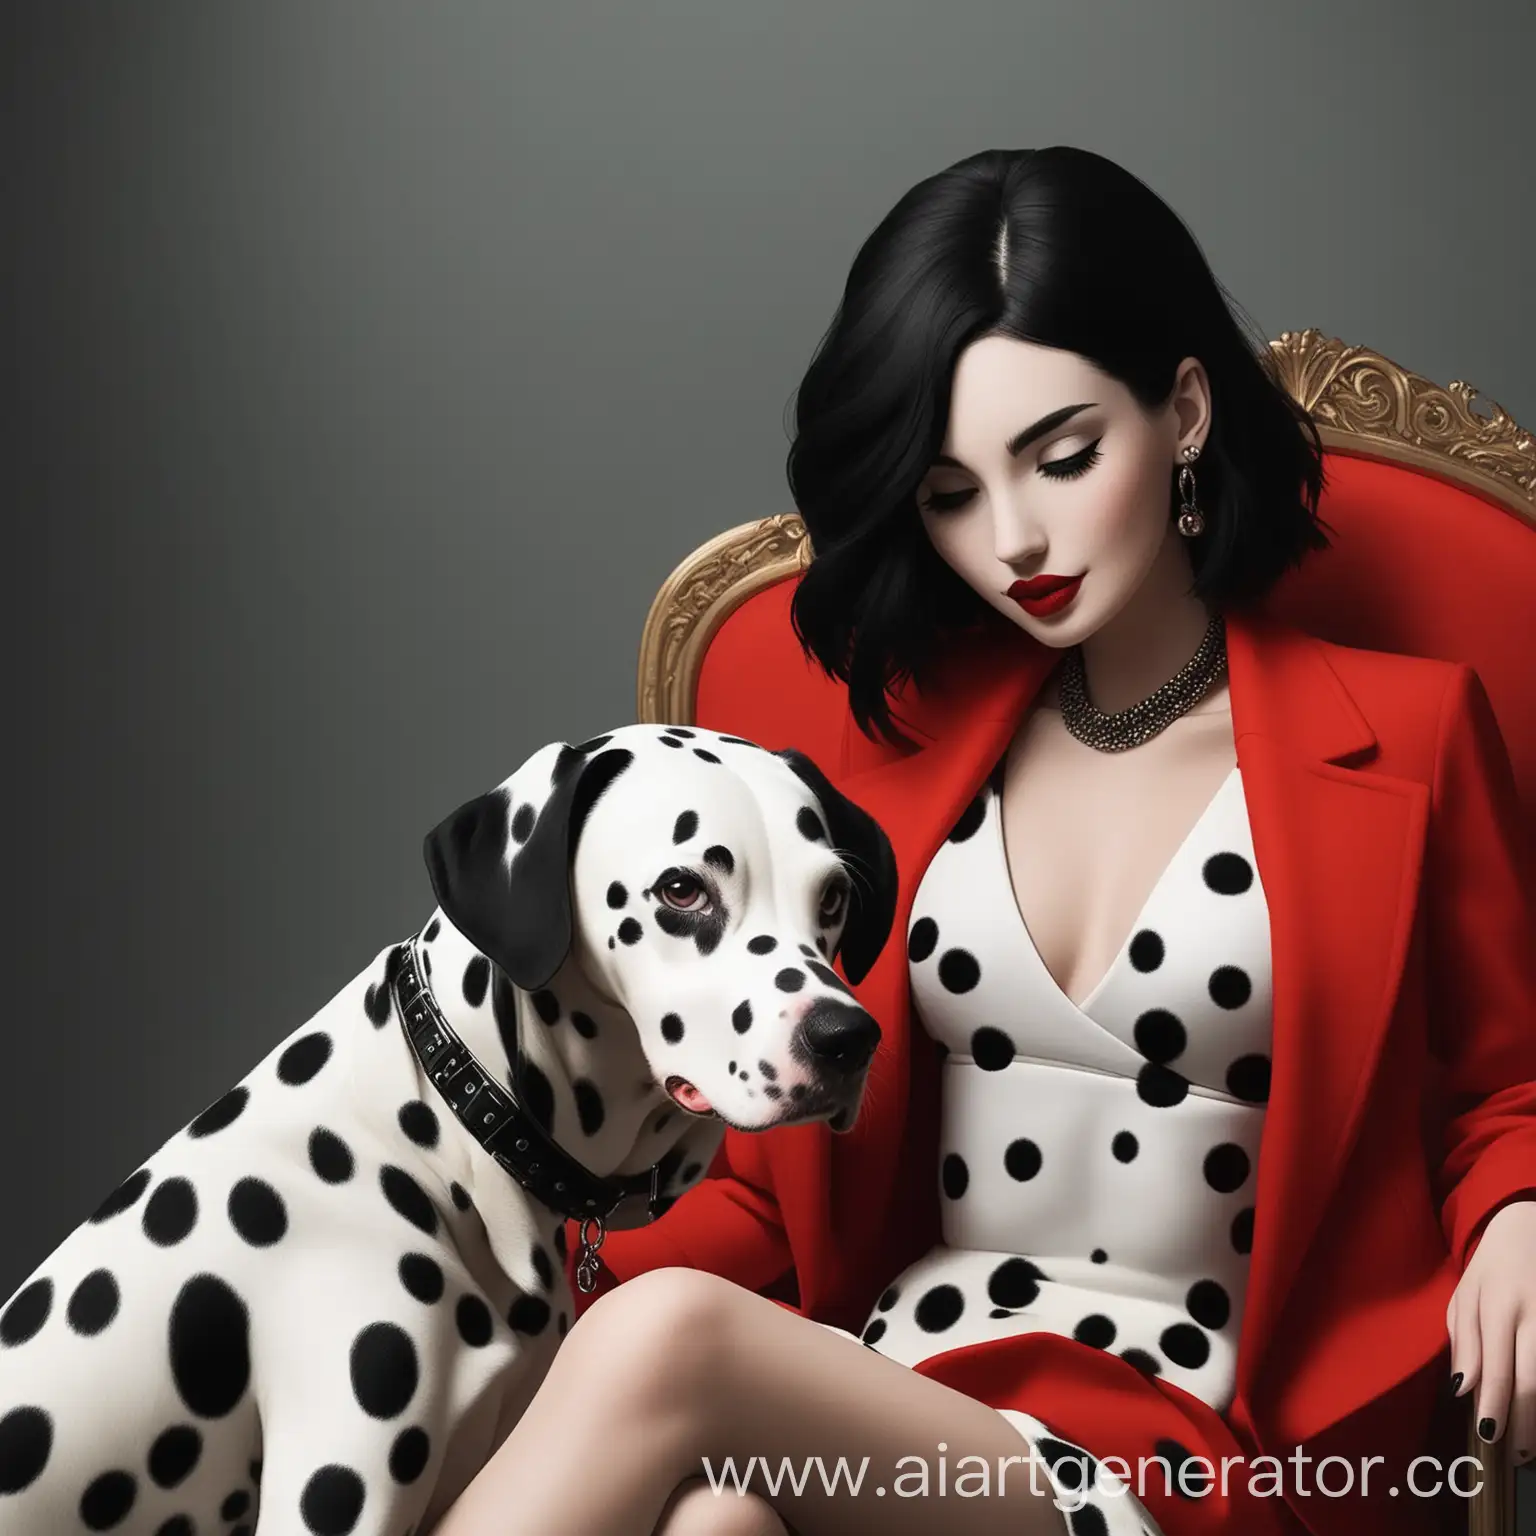 Girl-with-Black-Hair-and-Red-Lips-Sitting-Next-to-Dalmatian